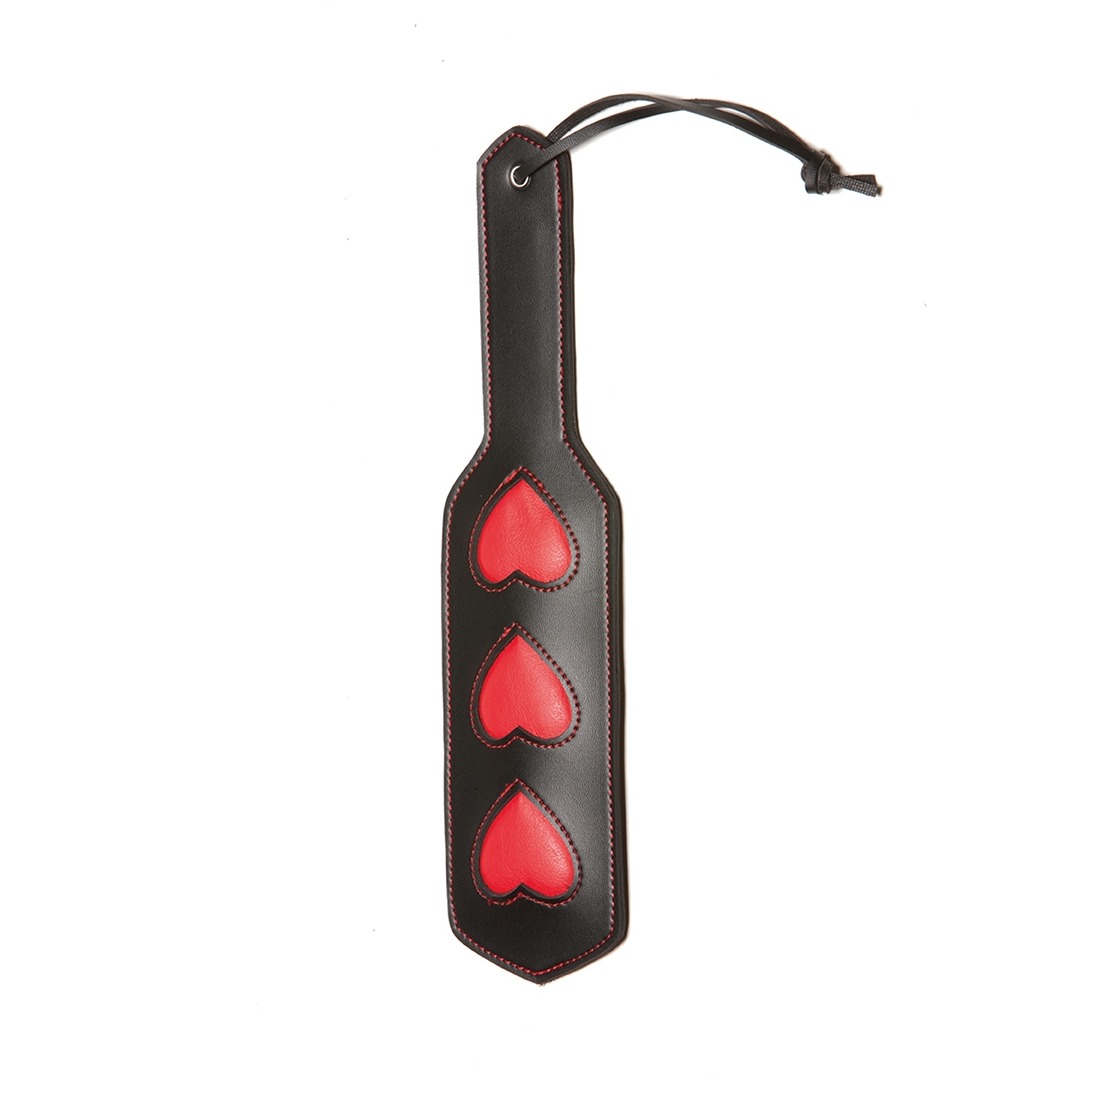 X-Play heart impression paddle - Red